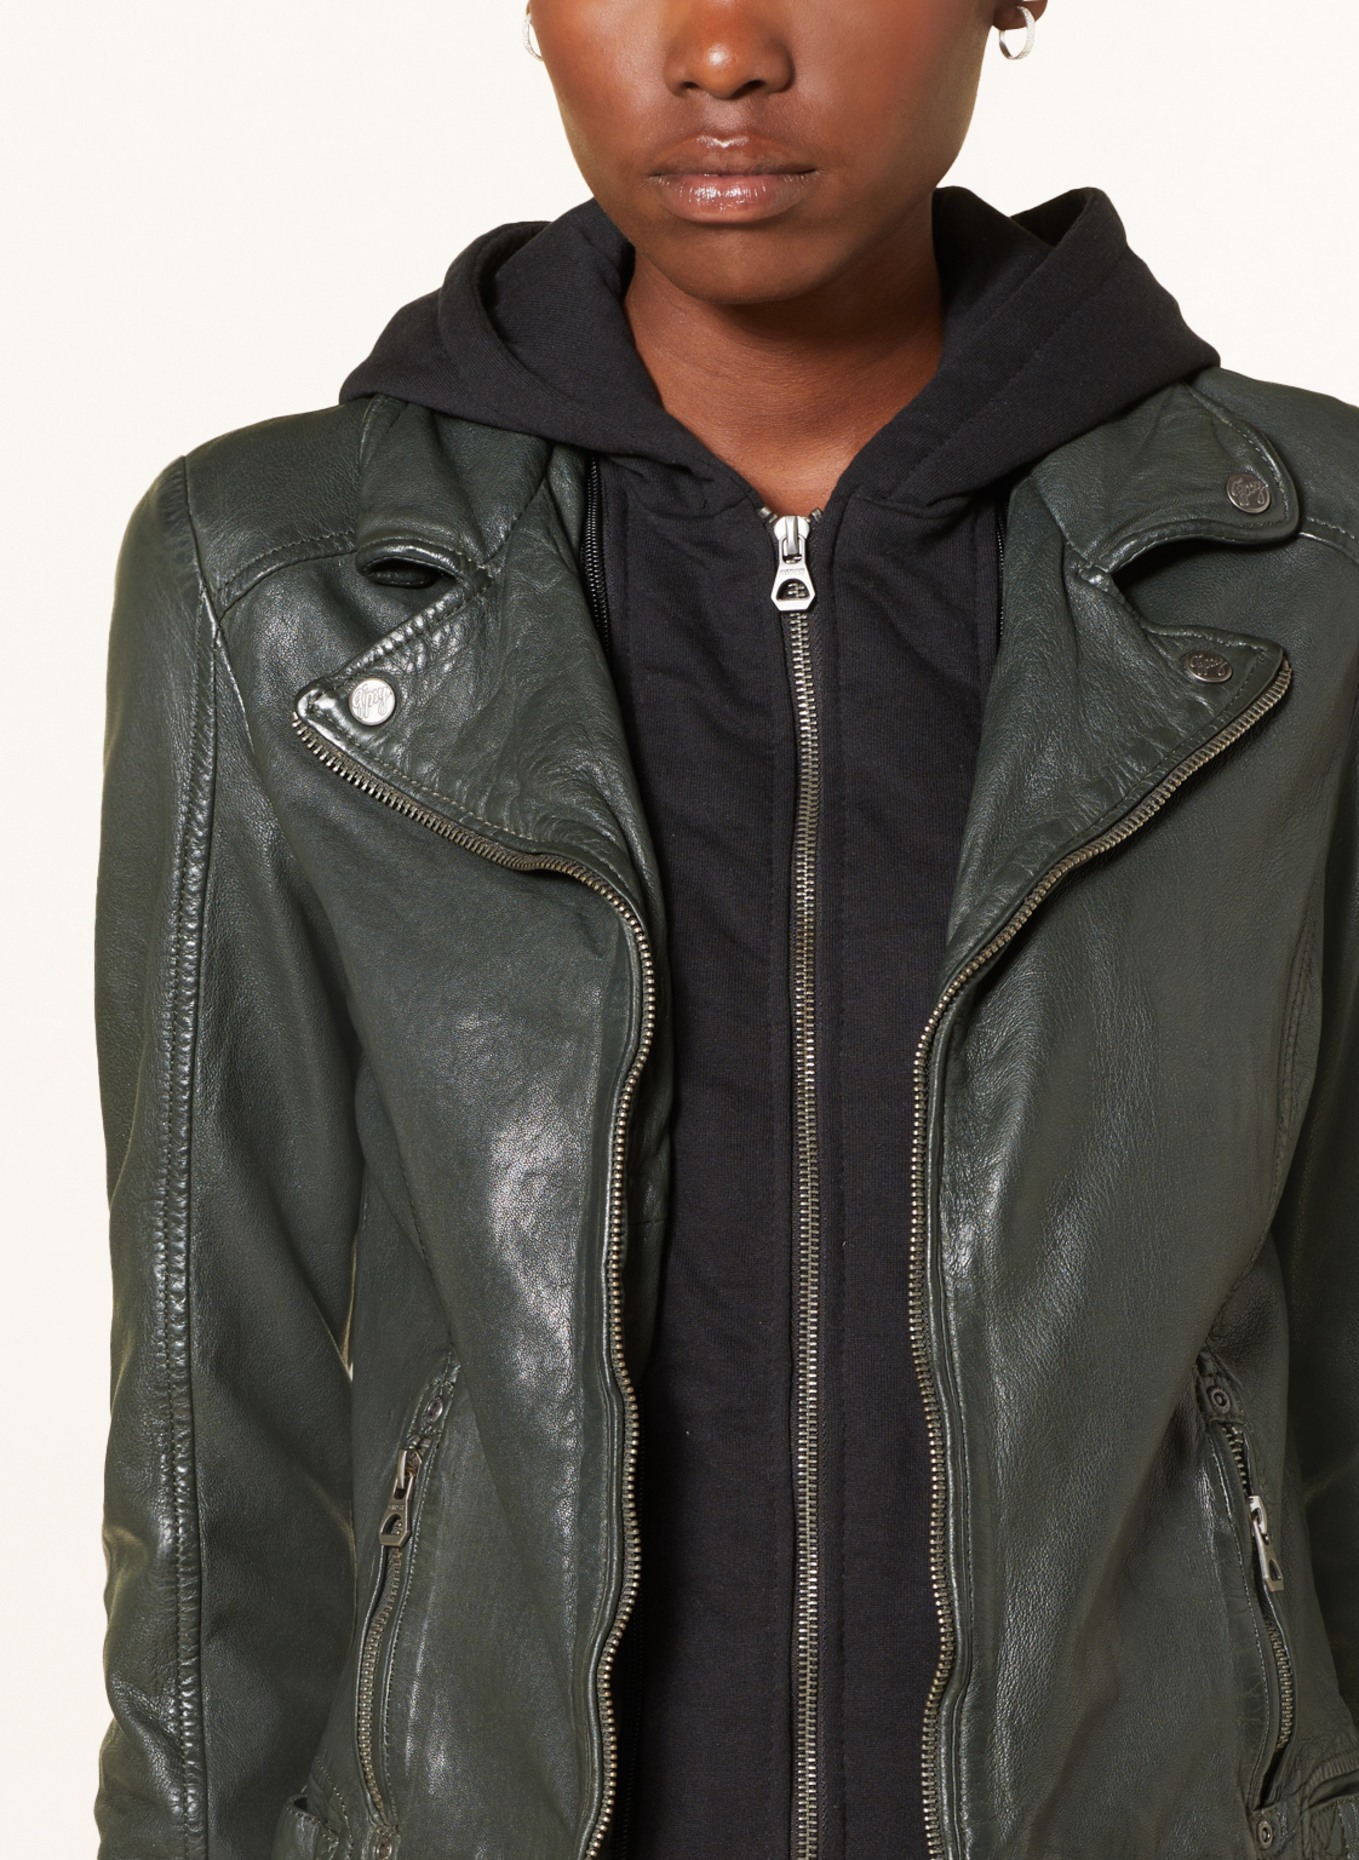 gipsy Leather GWYVIE black jacket in olive/